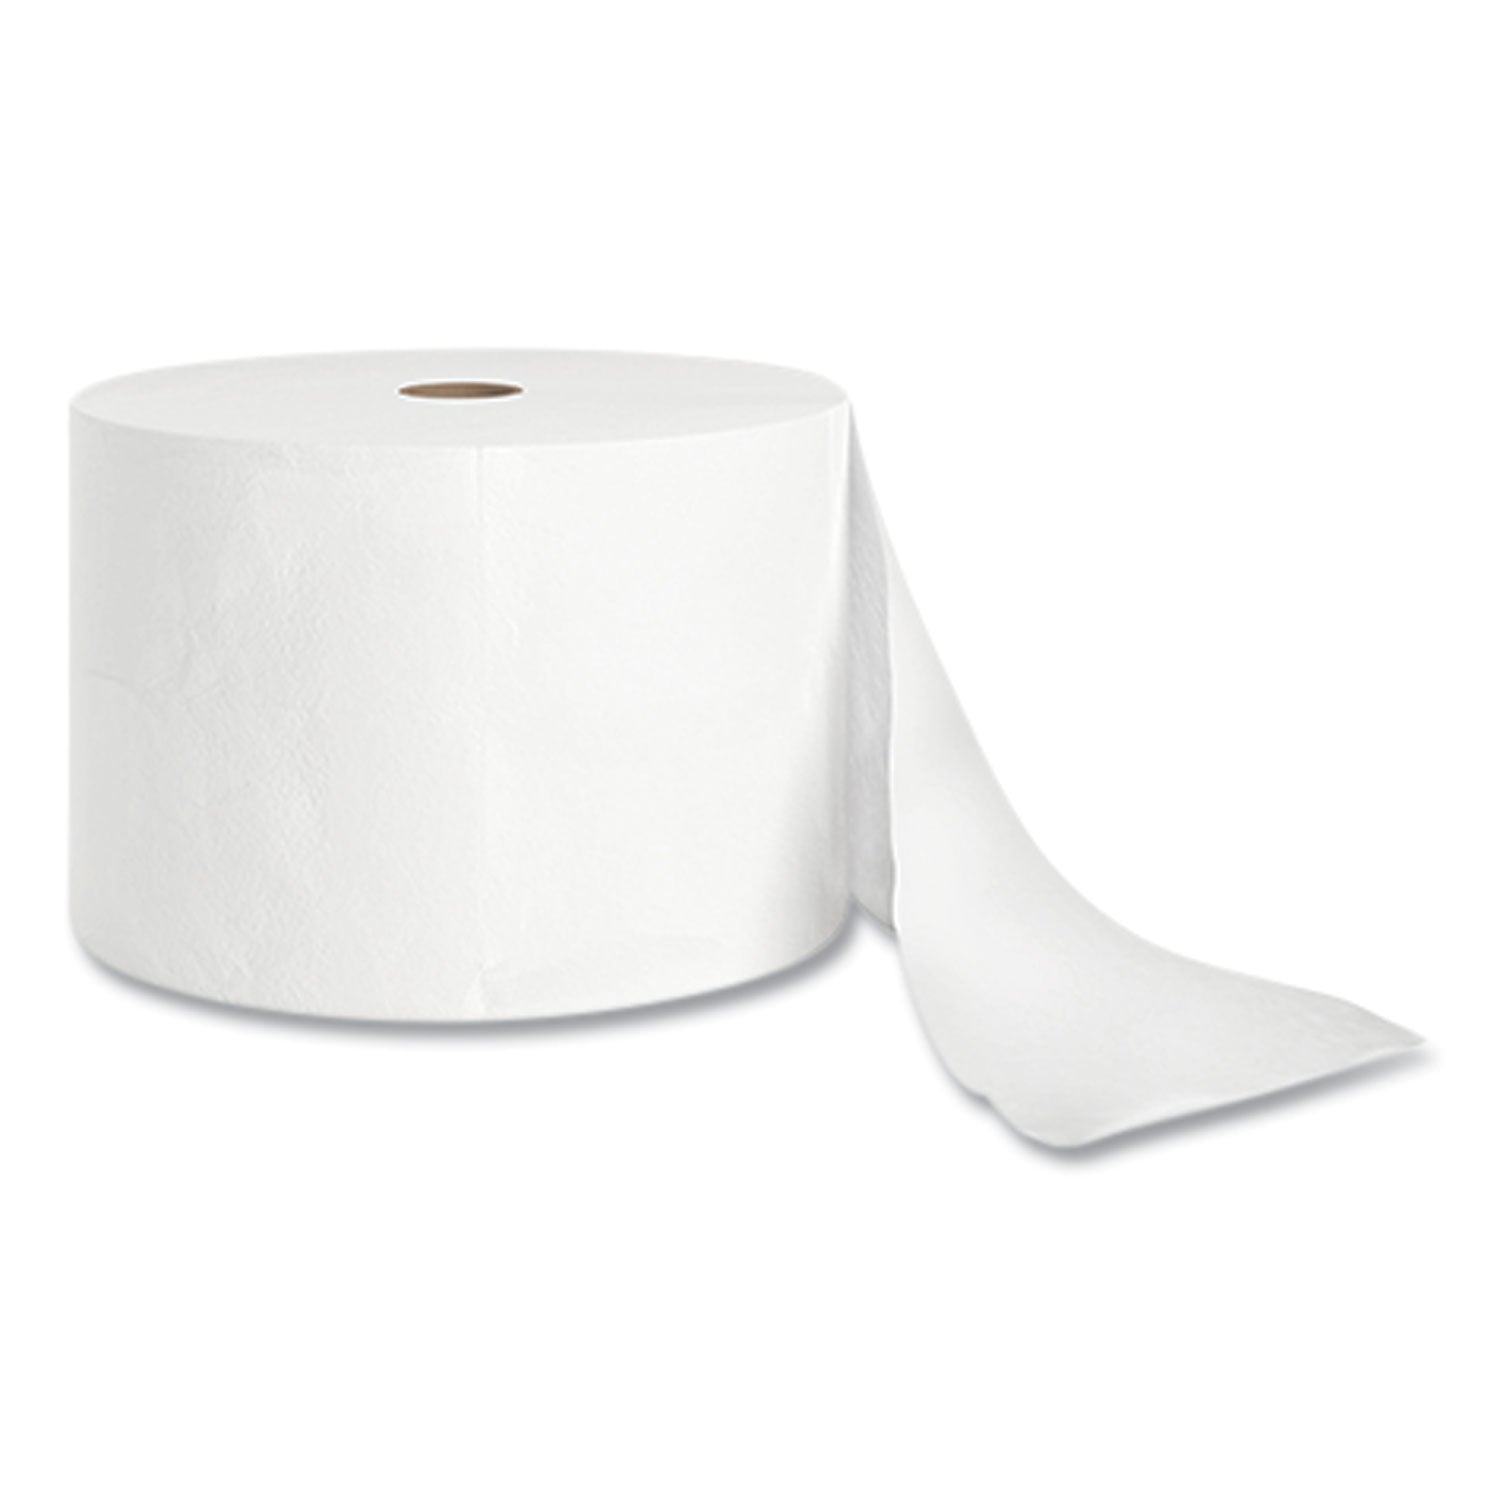 j-series-2-ply-small-core-bath-tissue-septic-safe-white-1000-sheets-roll-36-rolls-carton_cwz24405974 - 1